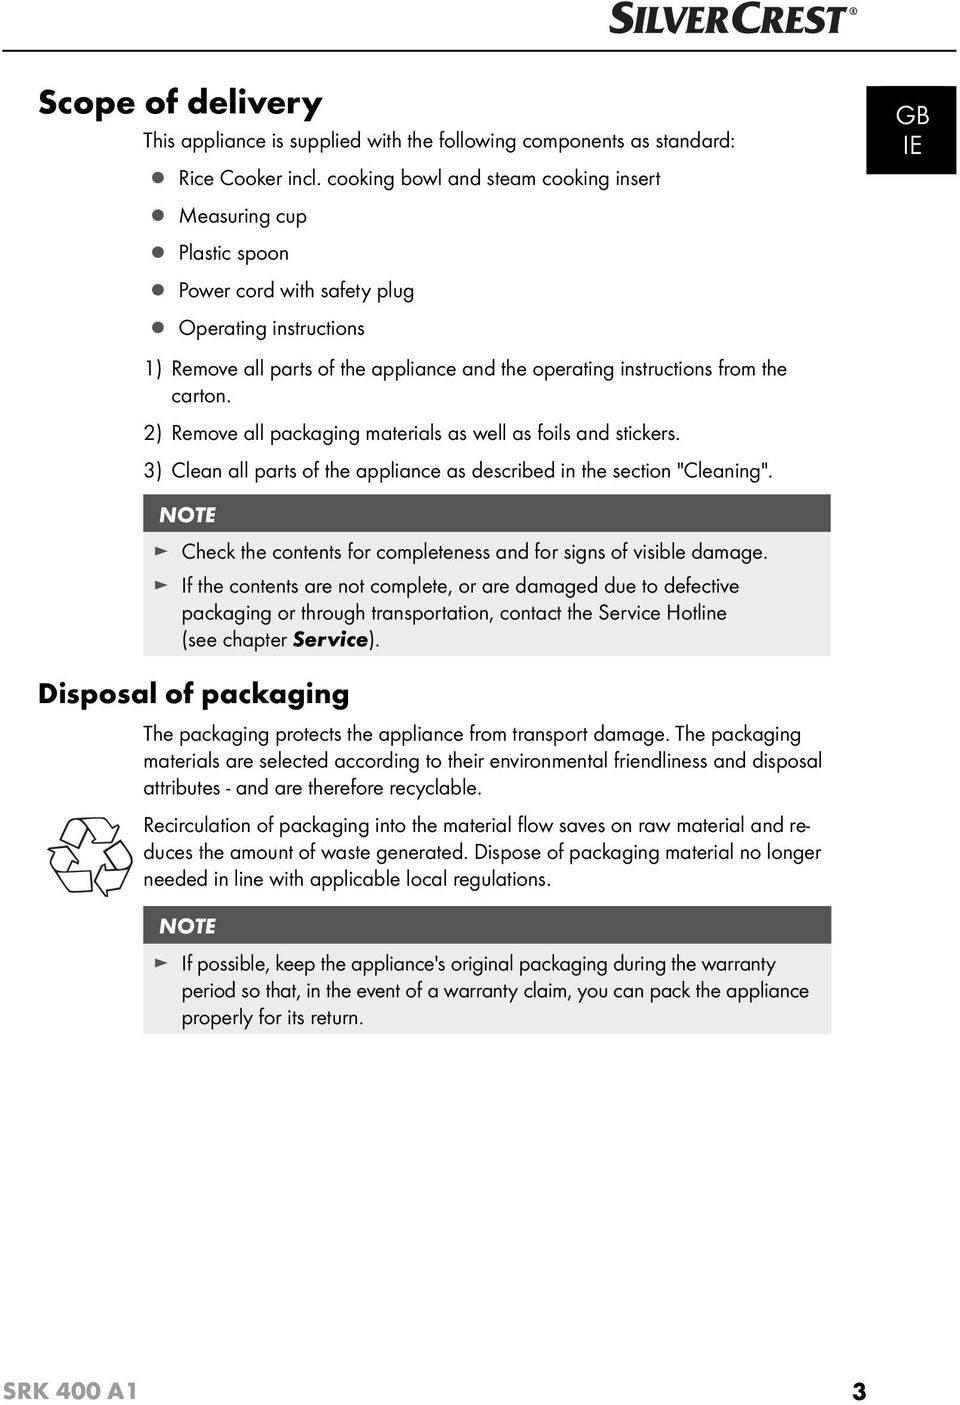 carton. 2) Remove all packaging materials as well as foils and stickers. 3) Clean all parts of the appliance as described in the section "Cleaning".